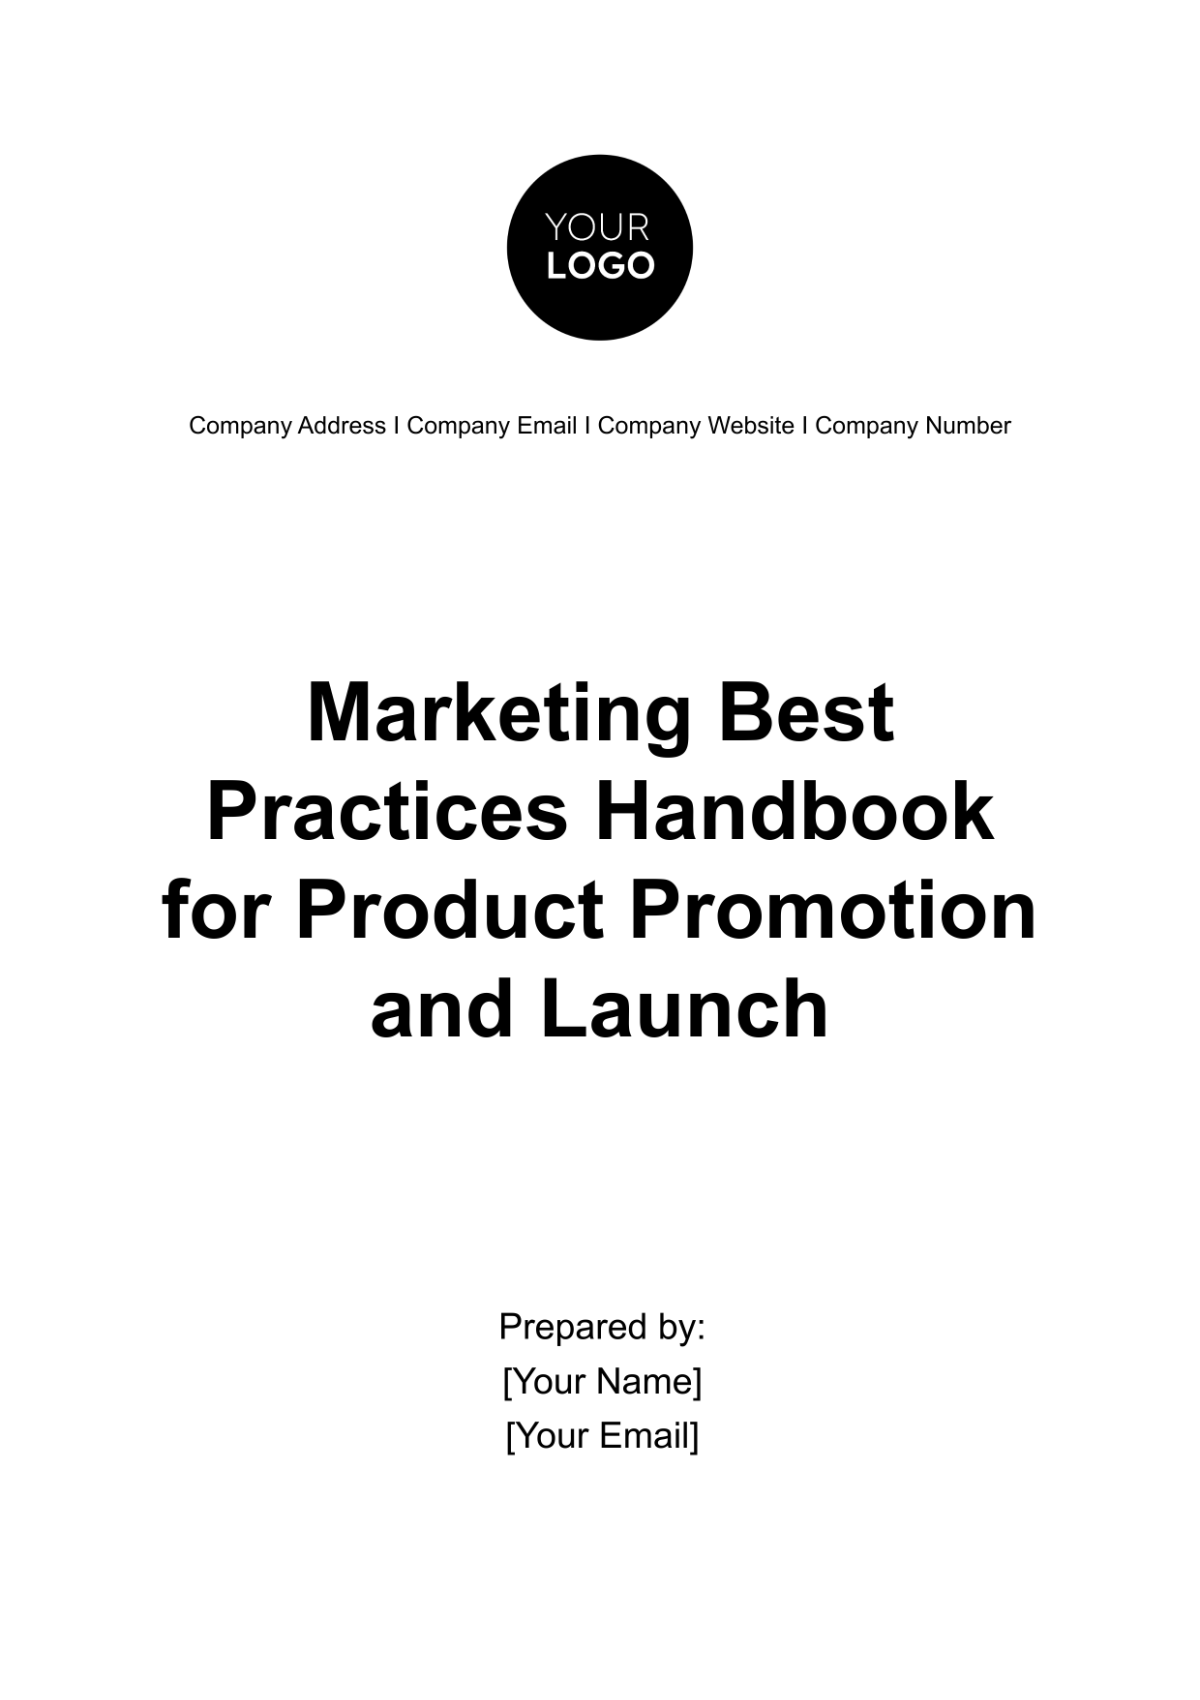 Free Marketing Best Practices Handbook for Product Promotion and Launch Template